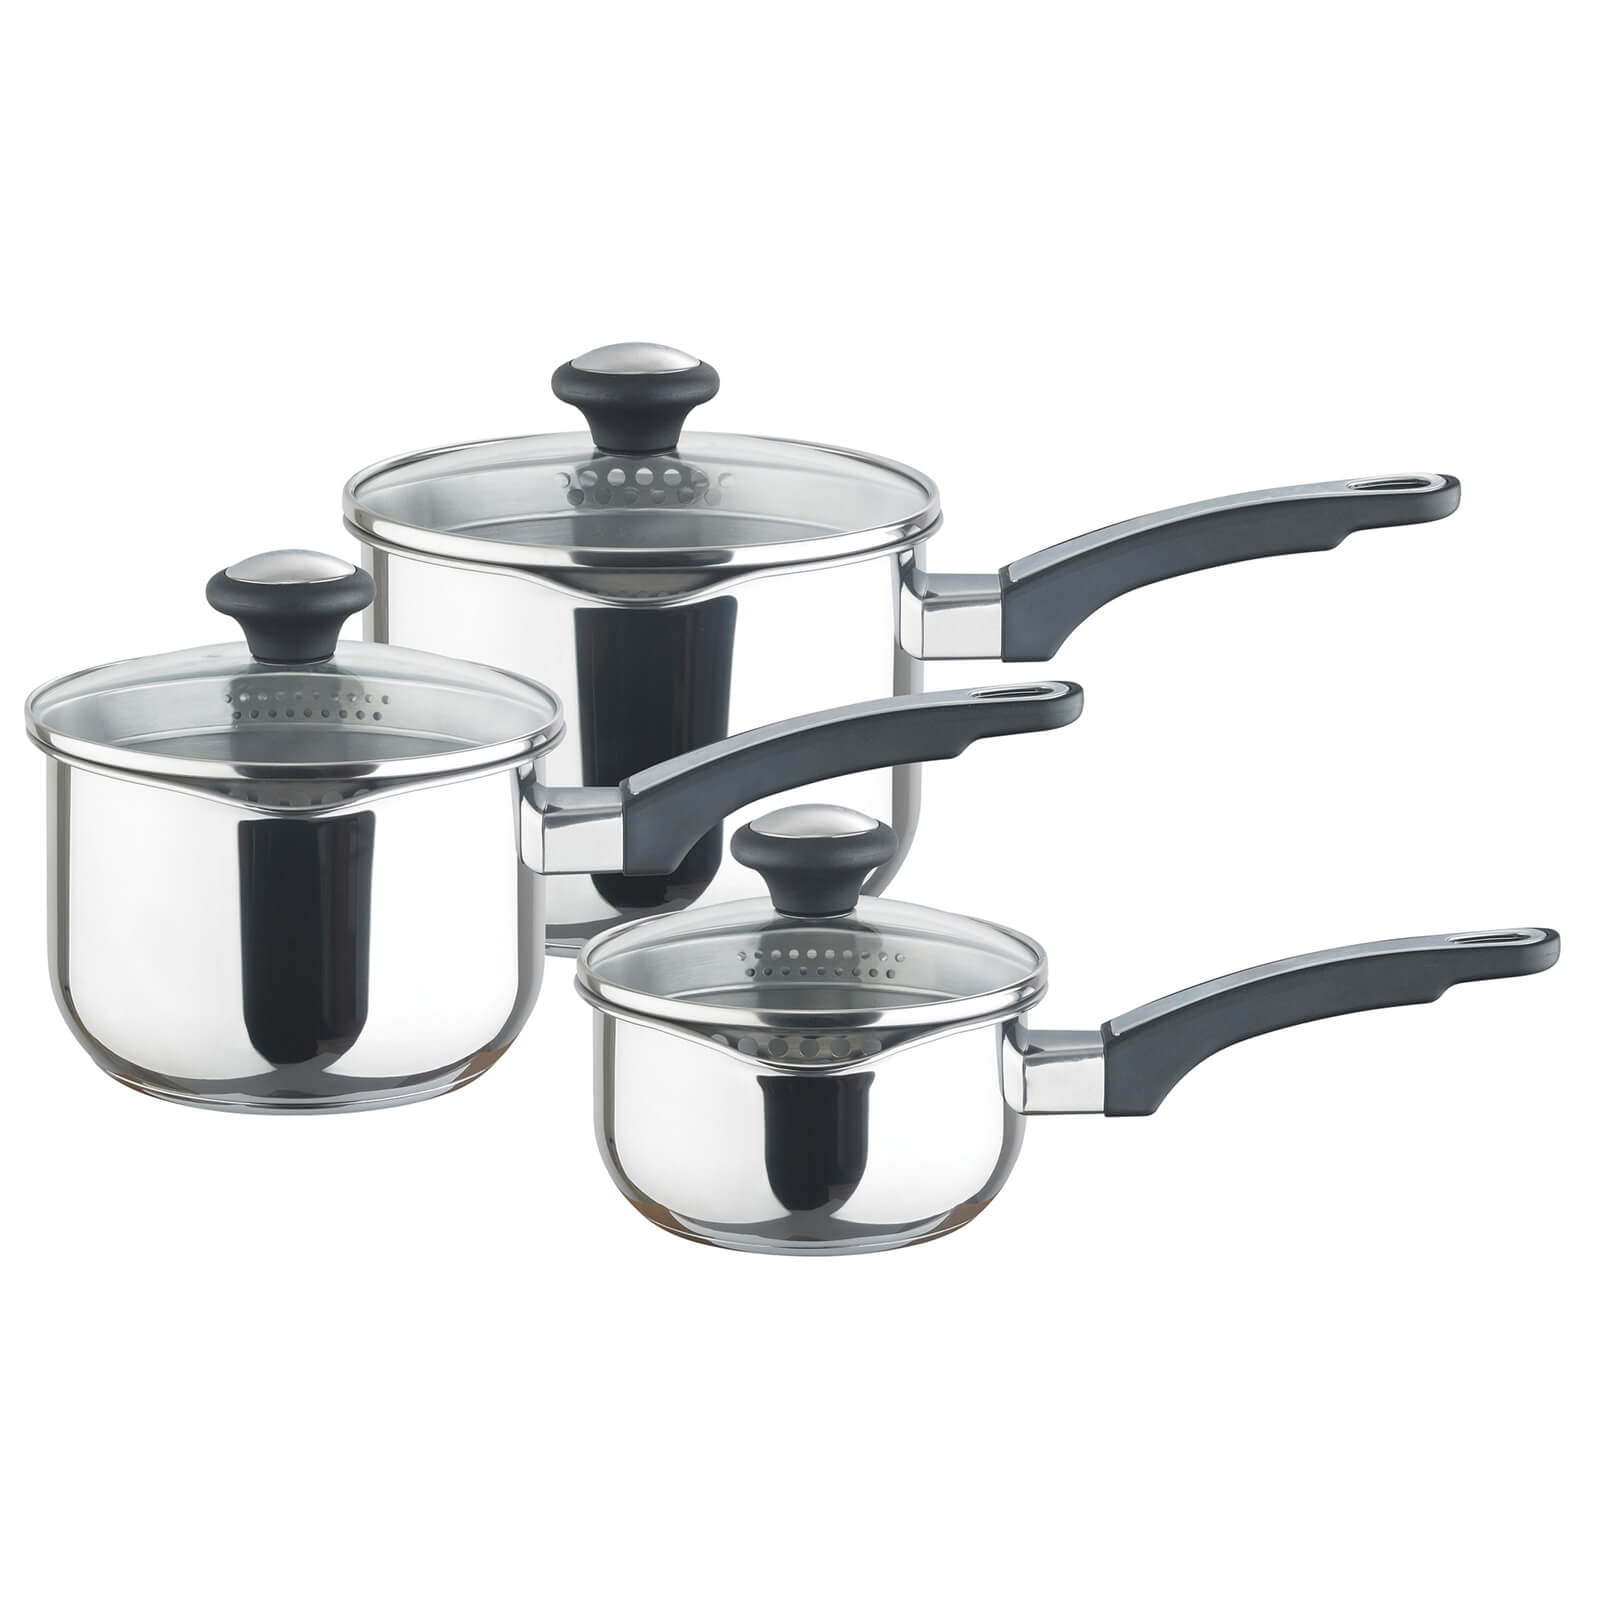 Prestige Everyday Induction Stainless Steel Straining Saucepans - Set of 3